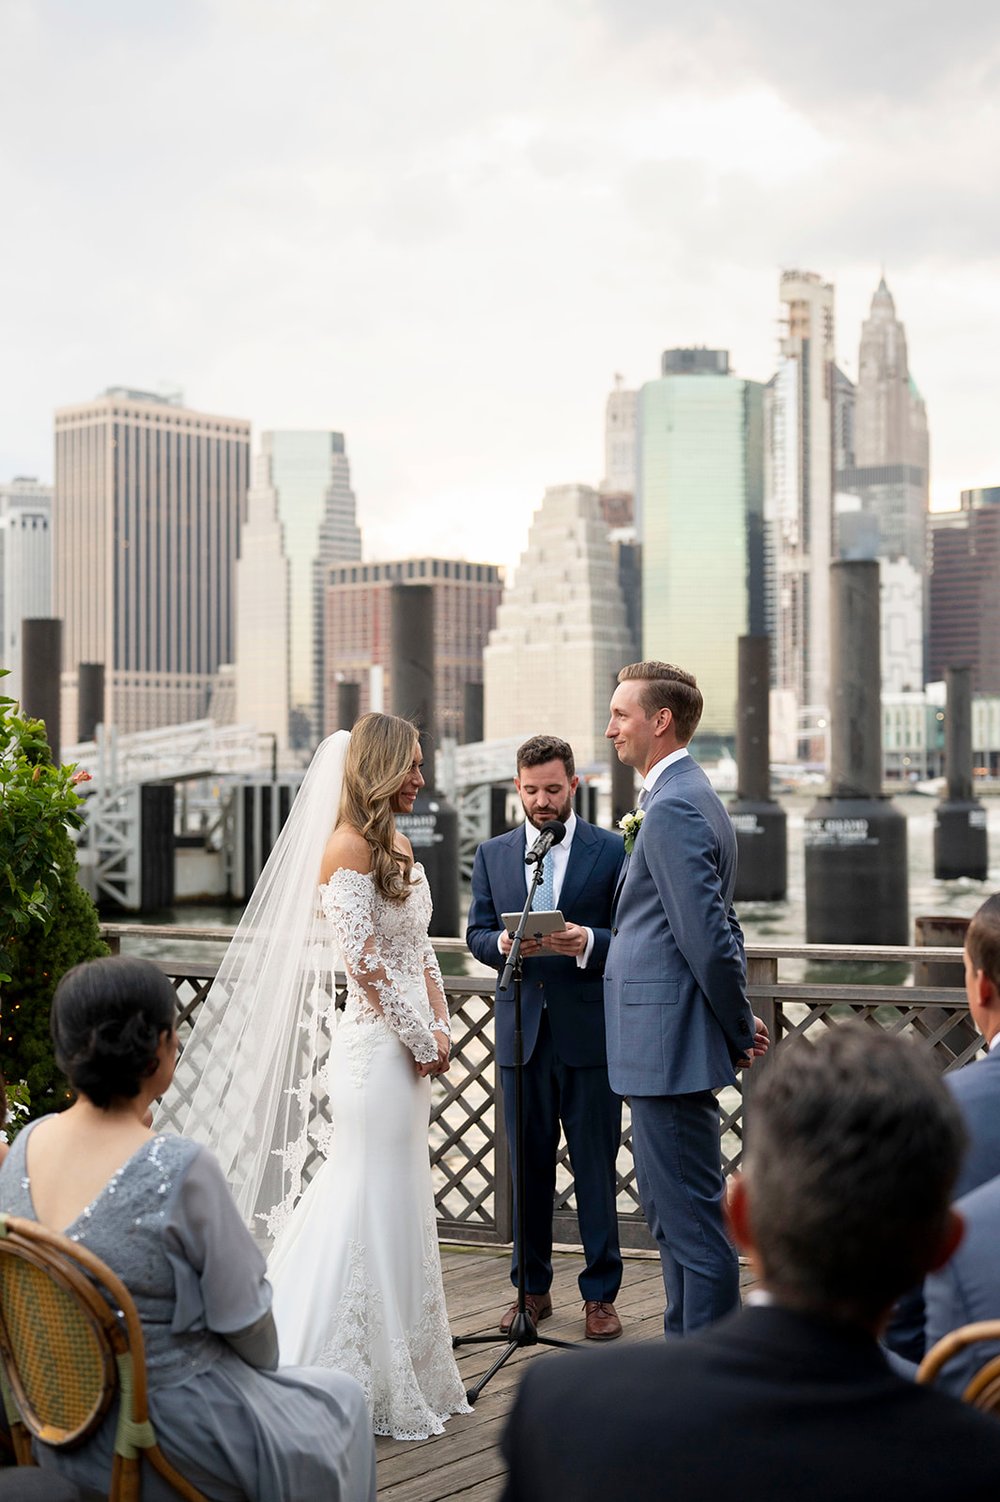  A Beautiful Ceremony at The River Cafe in Brooklyn, NY 